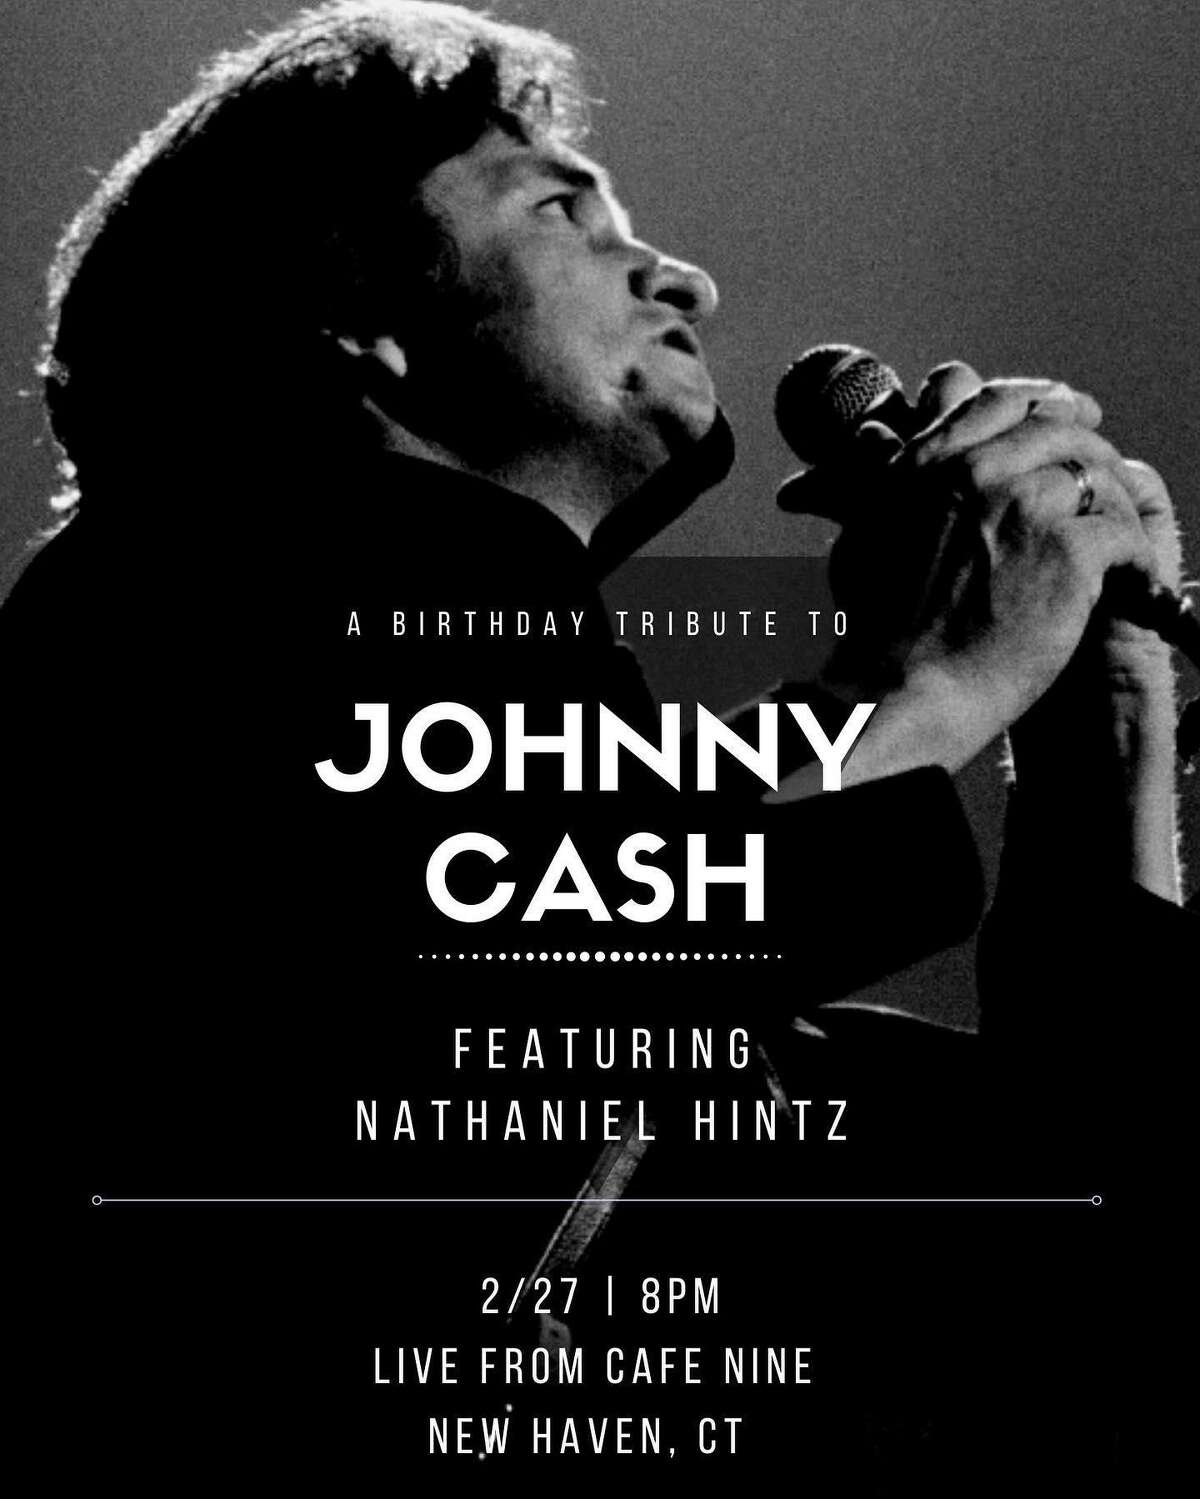 Cafe Nine is returning — virtually — this Saturday night with a free one-hour livestream event to celebrate what would be Johnny Cash's 89th birthday, featuring Nathaniel Hintz of Watertown. (The Man in Black's actual birthday was Friday.) Showtime is 8 p.m., streaming from the Cafe Nine Facebook page.